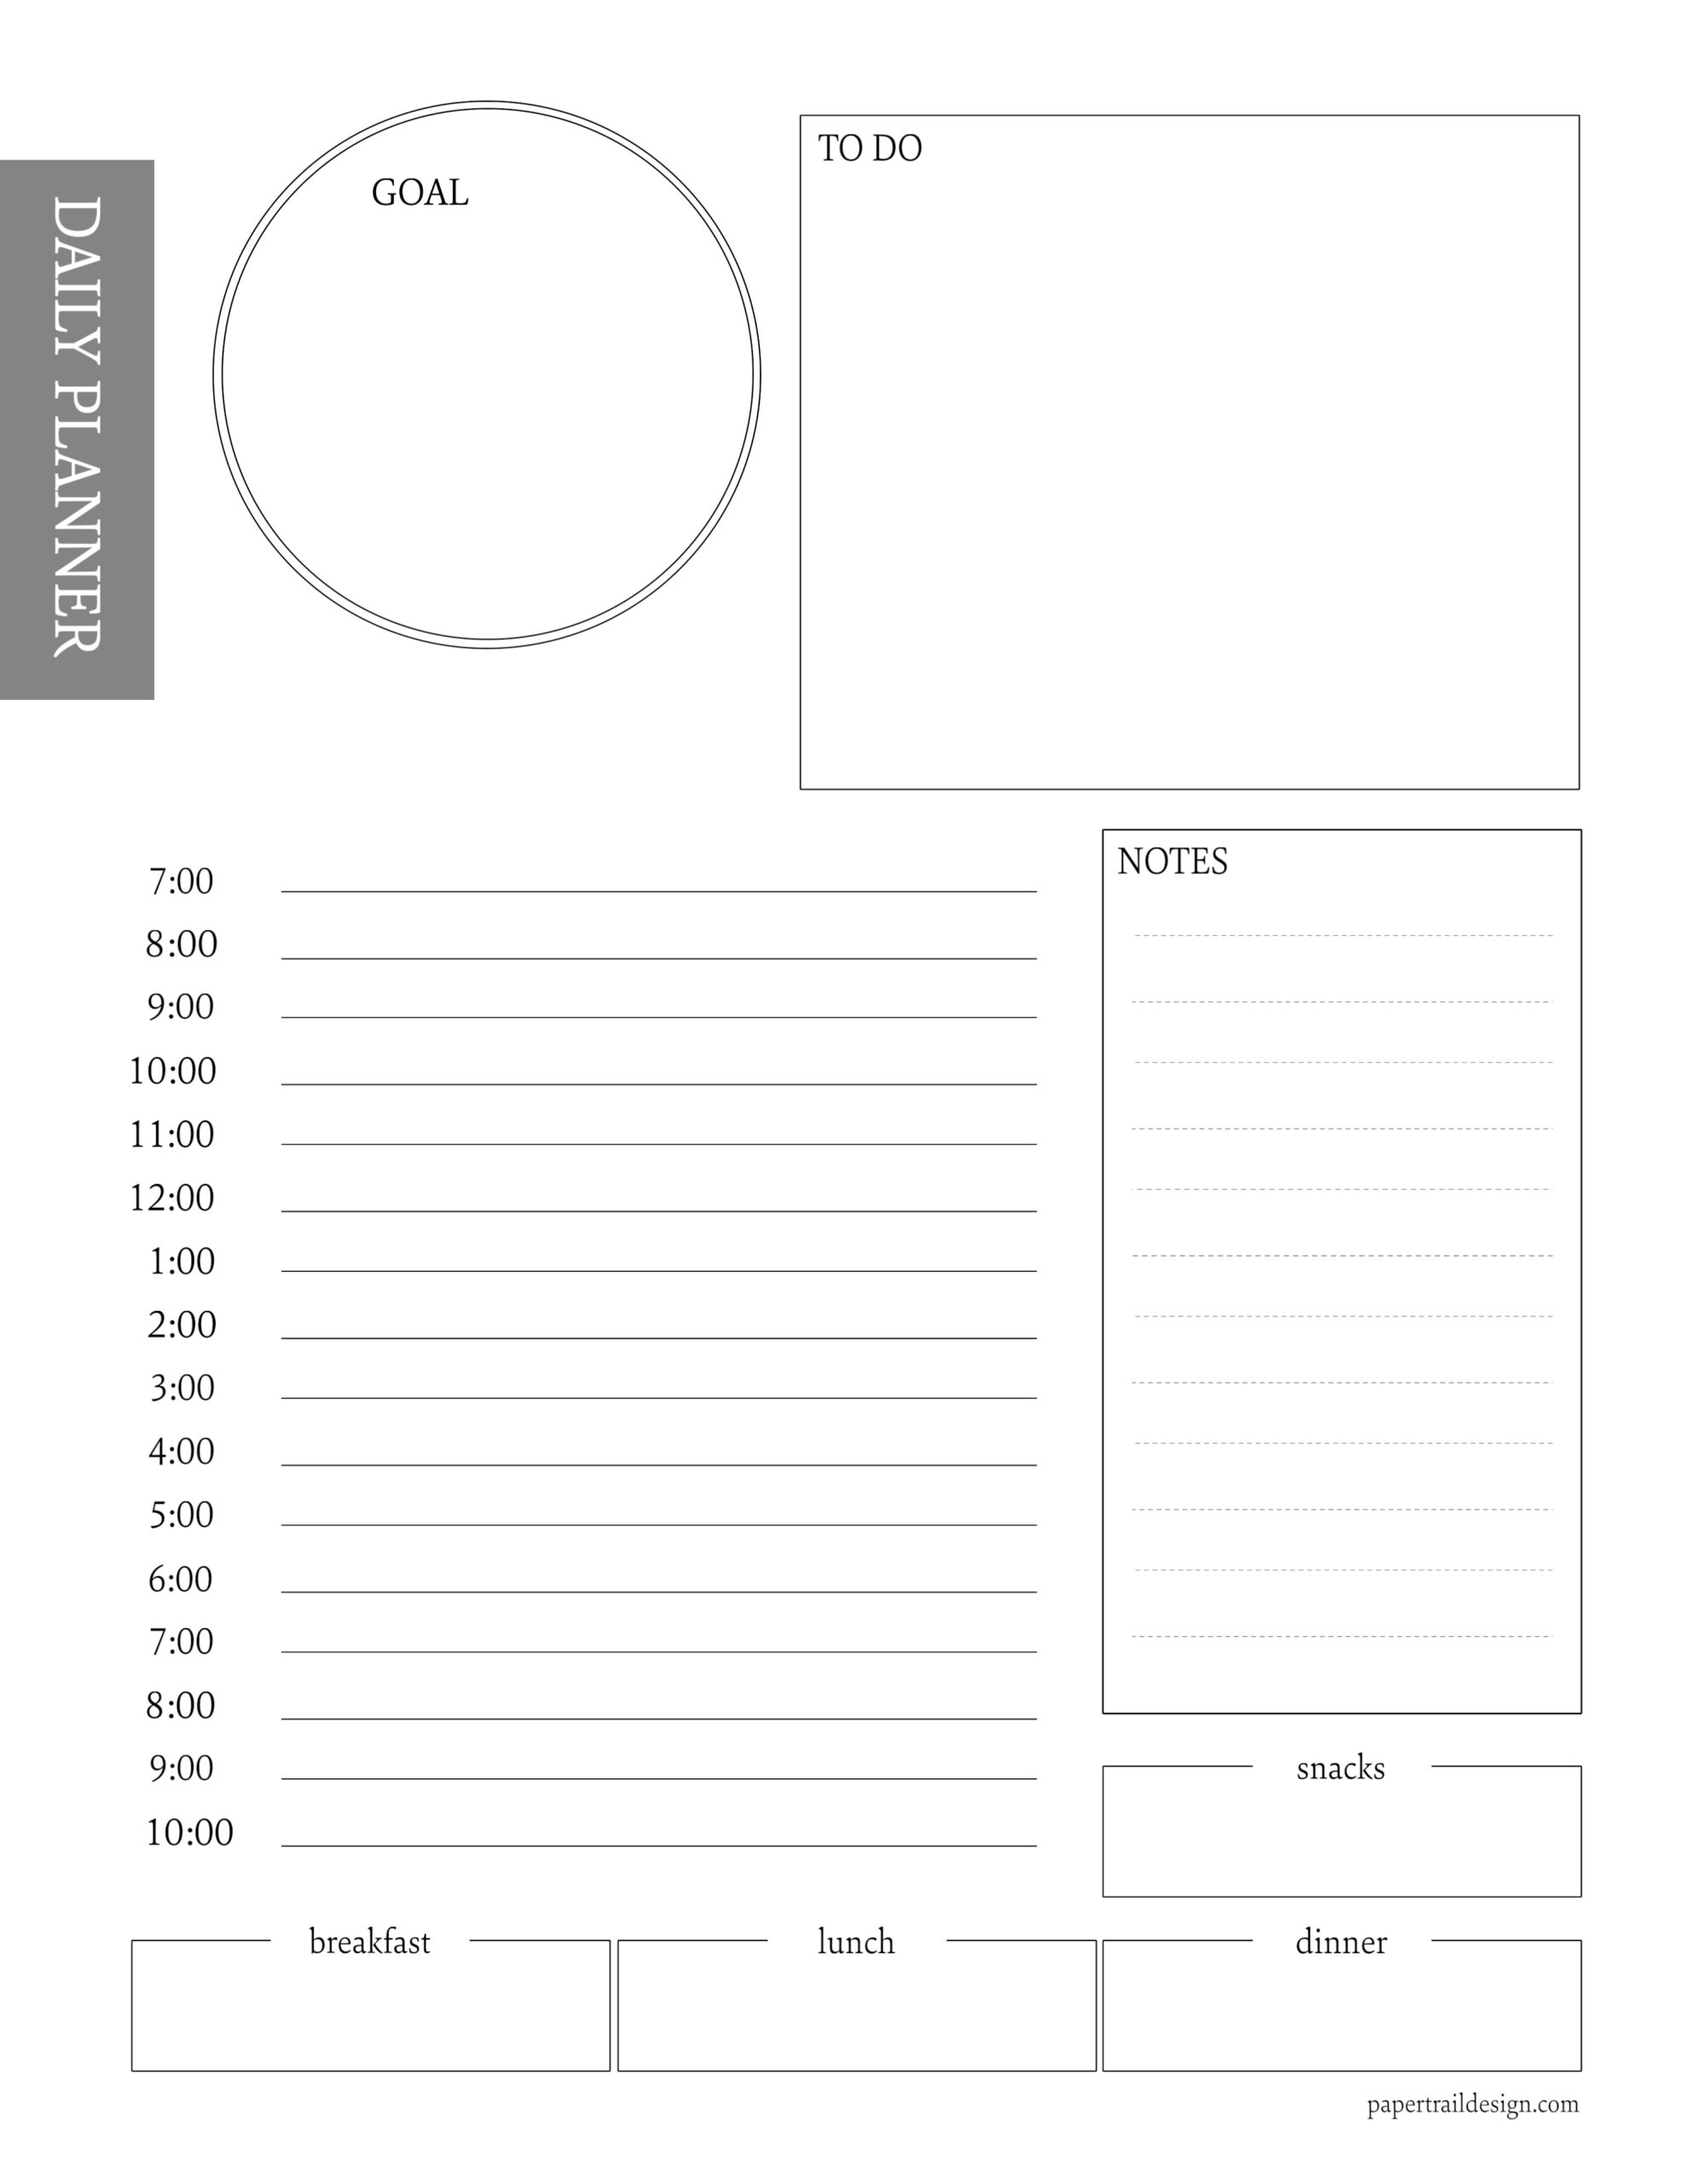 free-daily-planner-printable-template-paper-trail-design